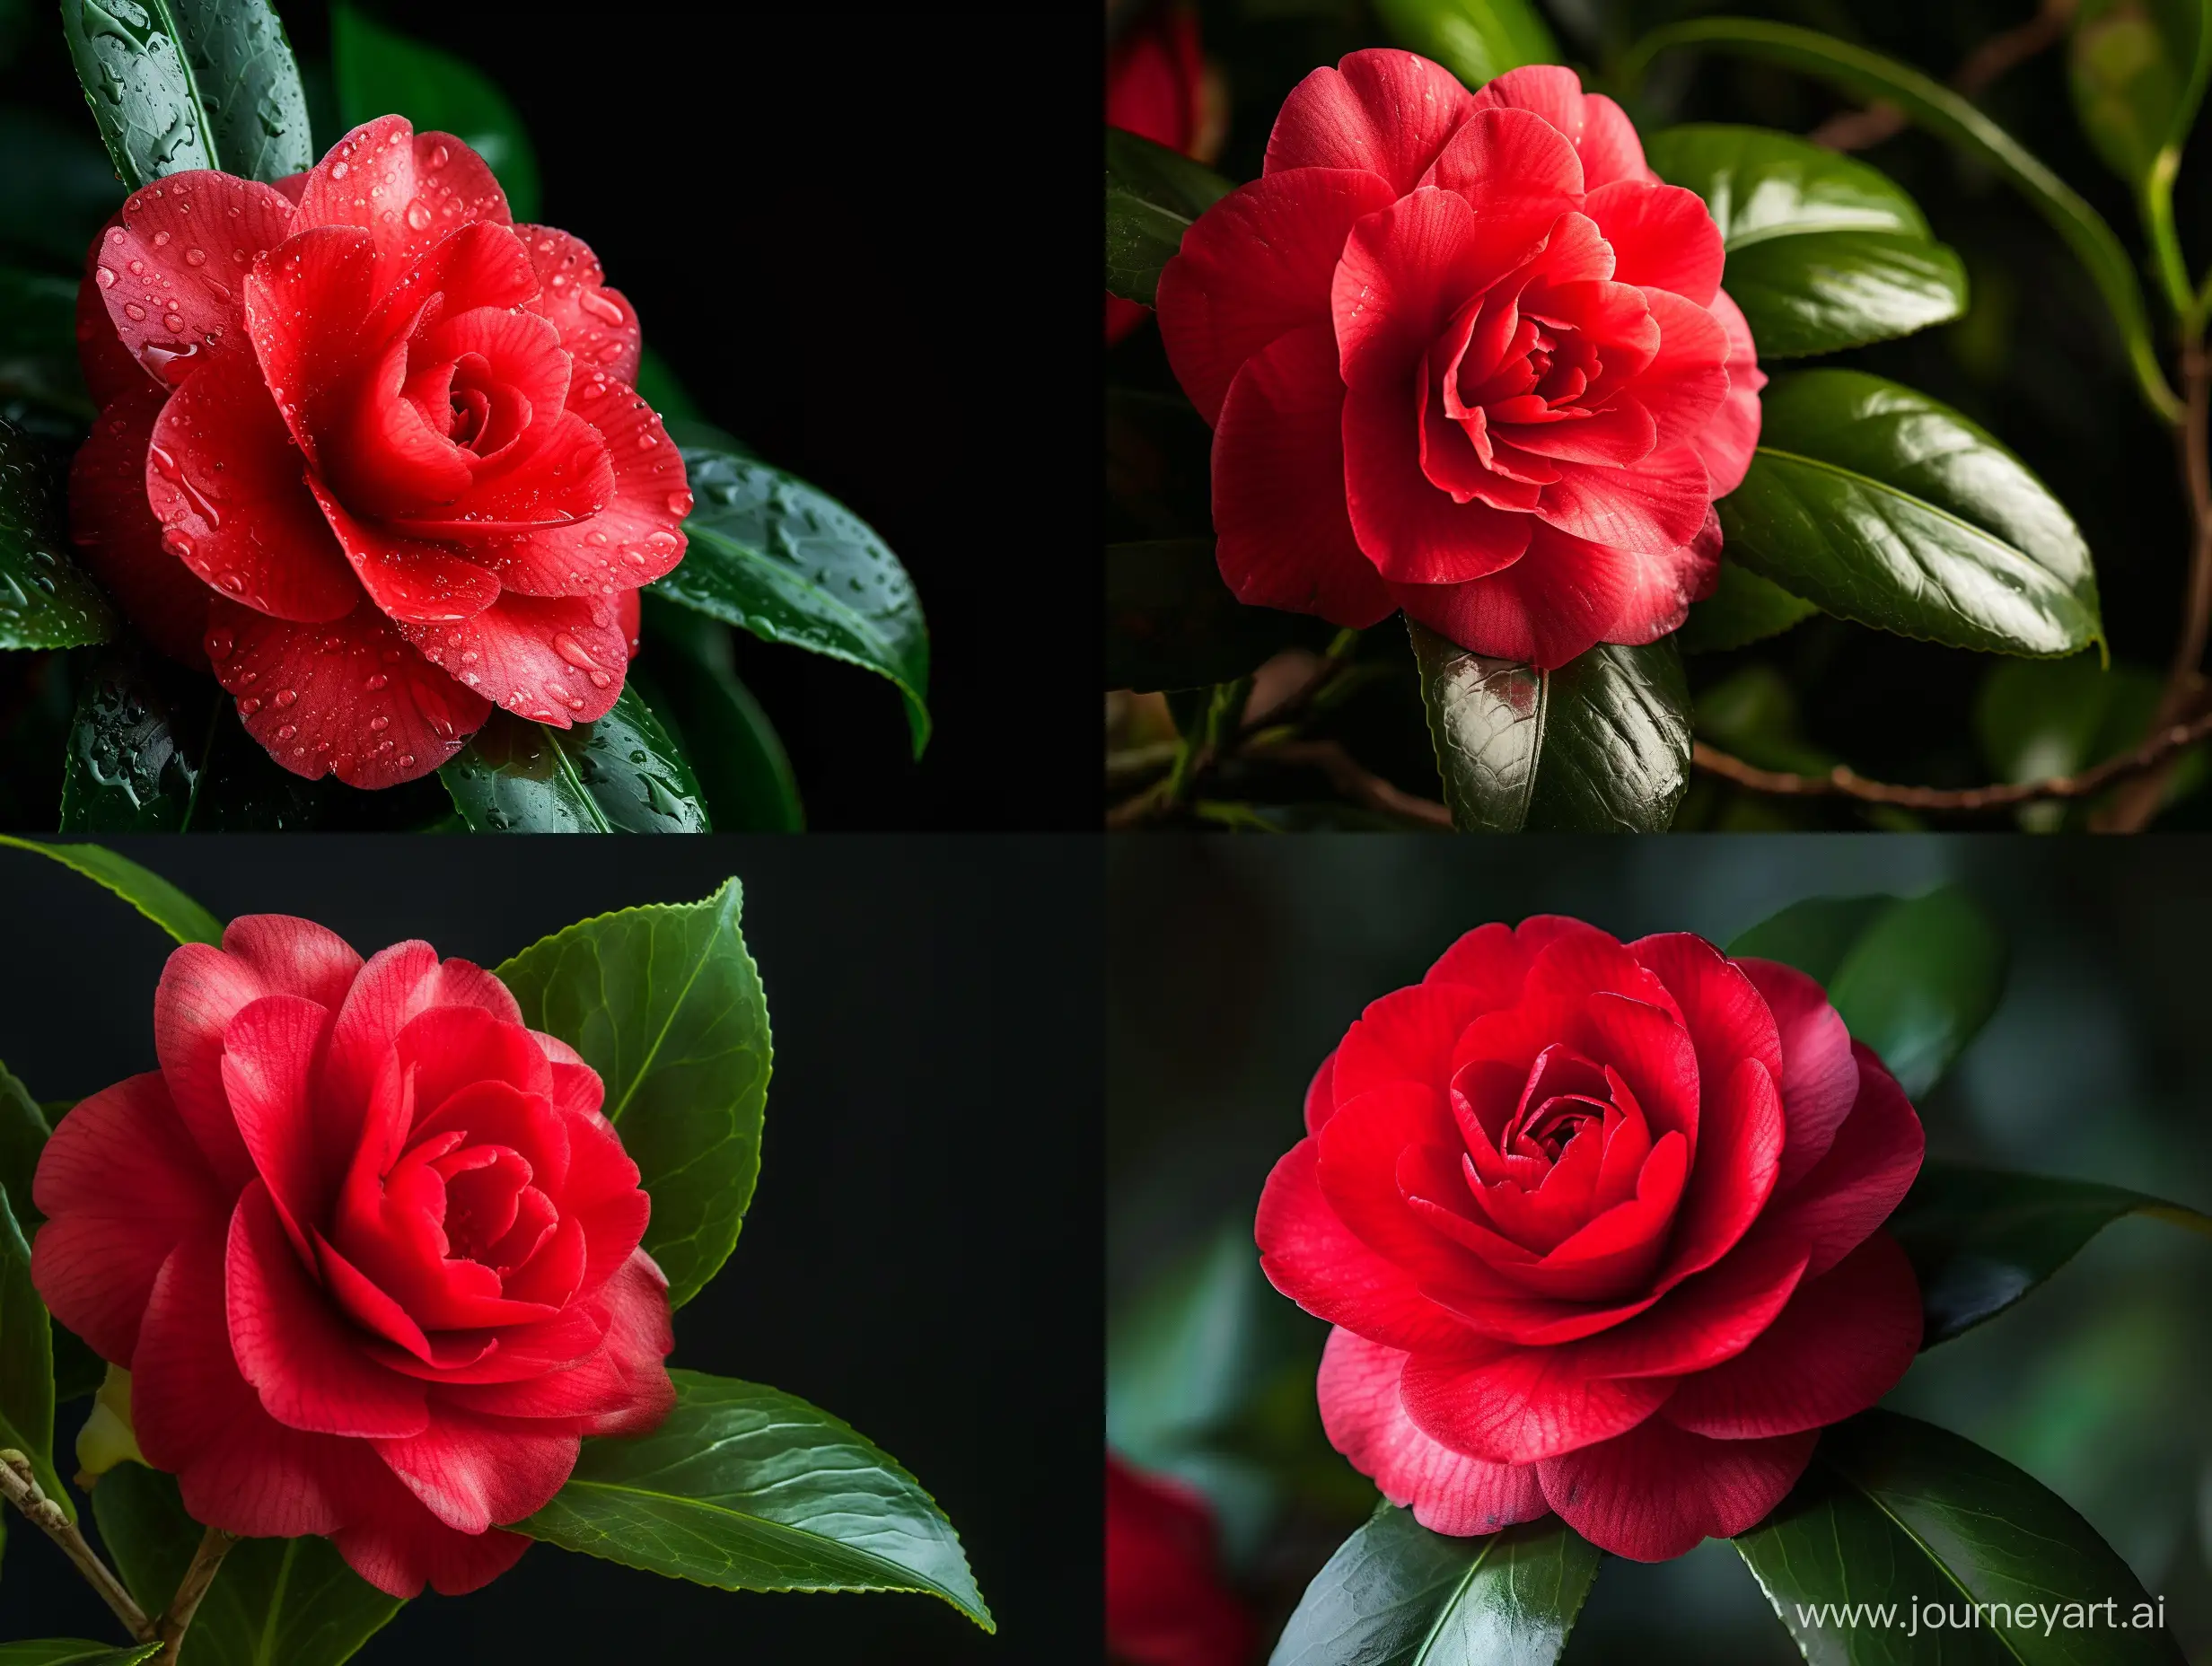 Commercial photography, very detailed, good retouching, red Camellia flower